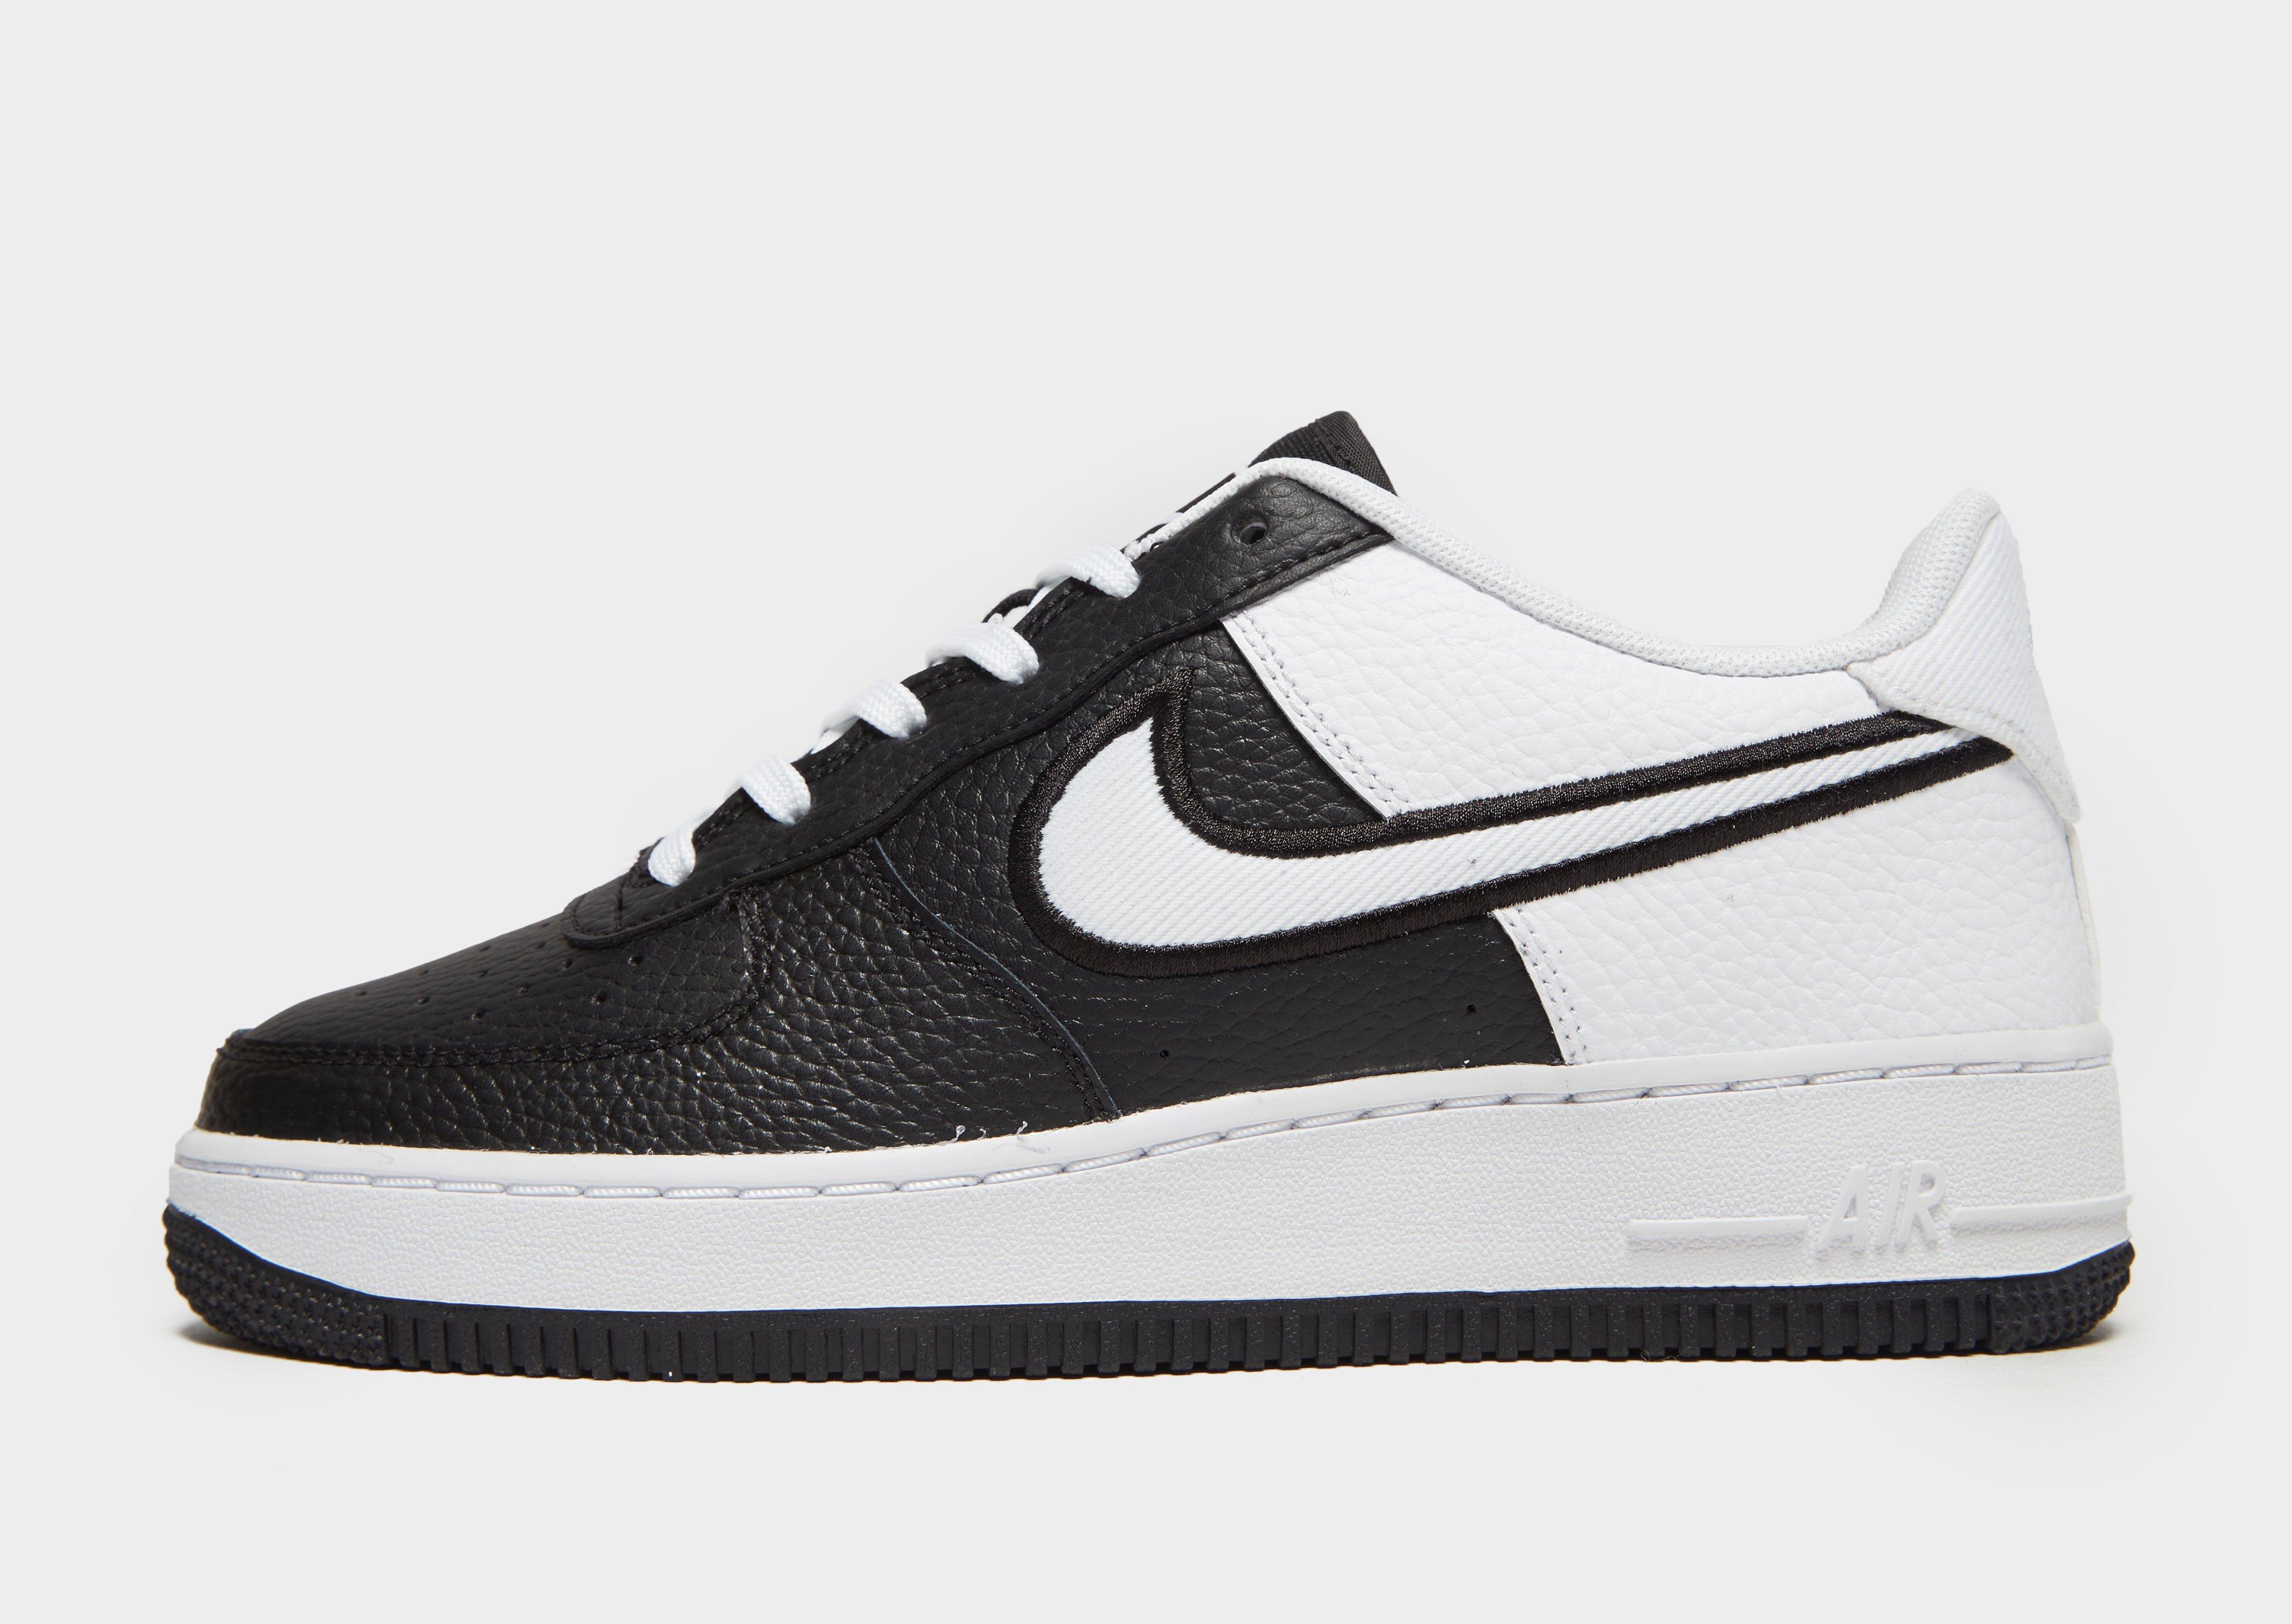 air force 1 junior white and black